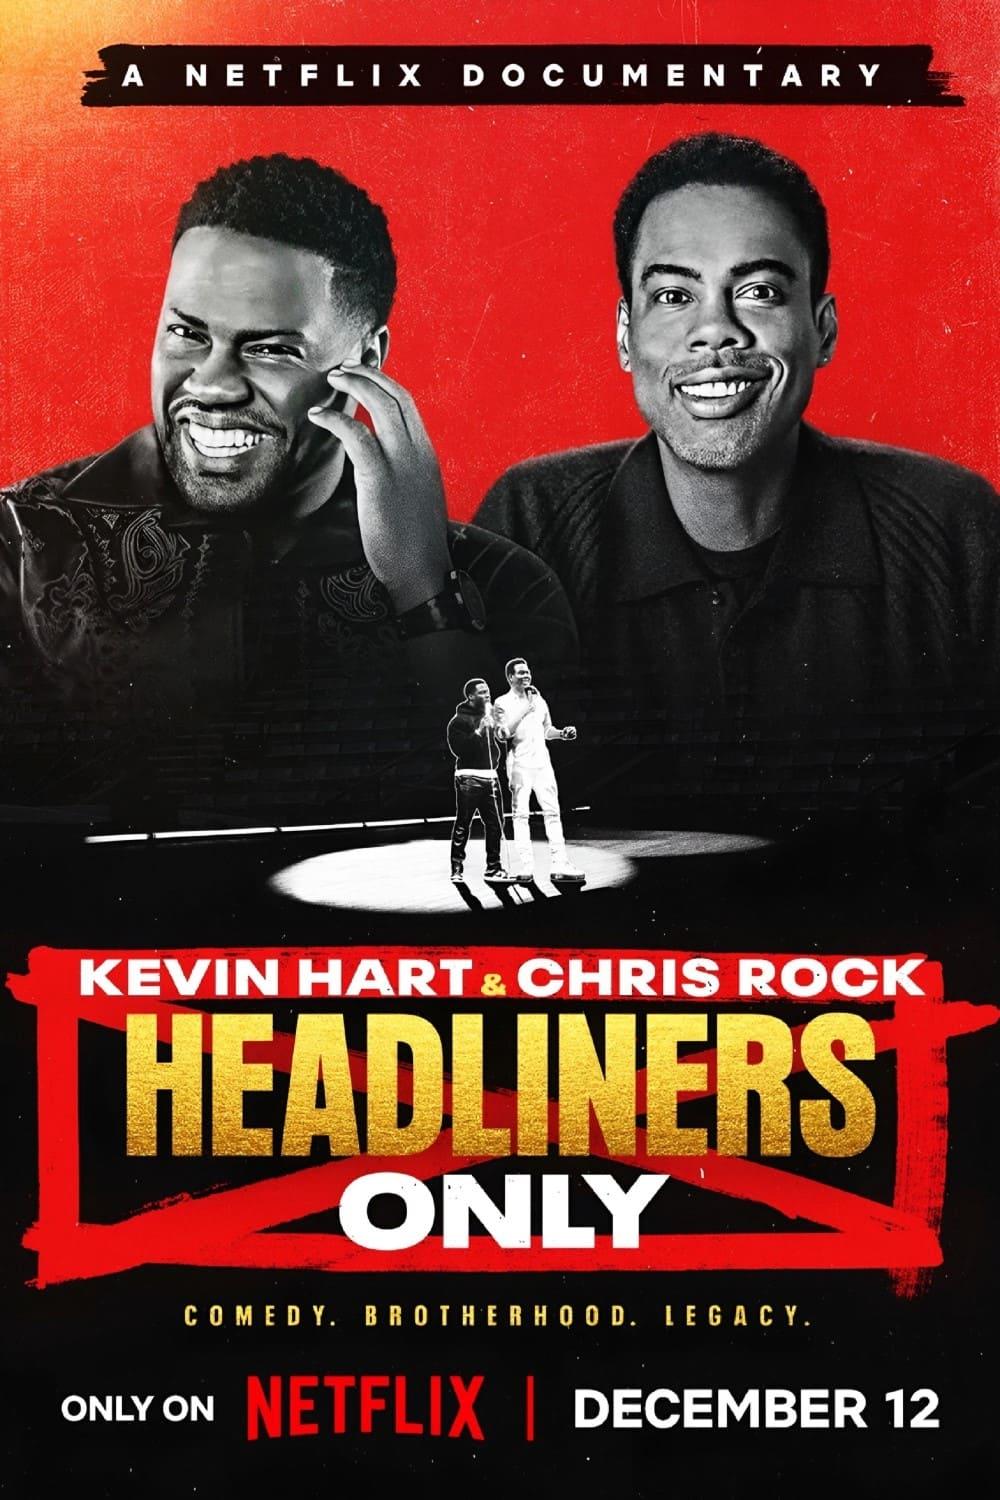 Kevin Hart & Chris Rock: Headliners Only poster